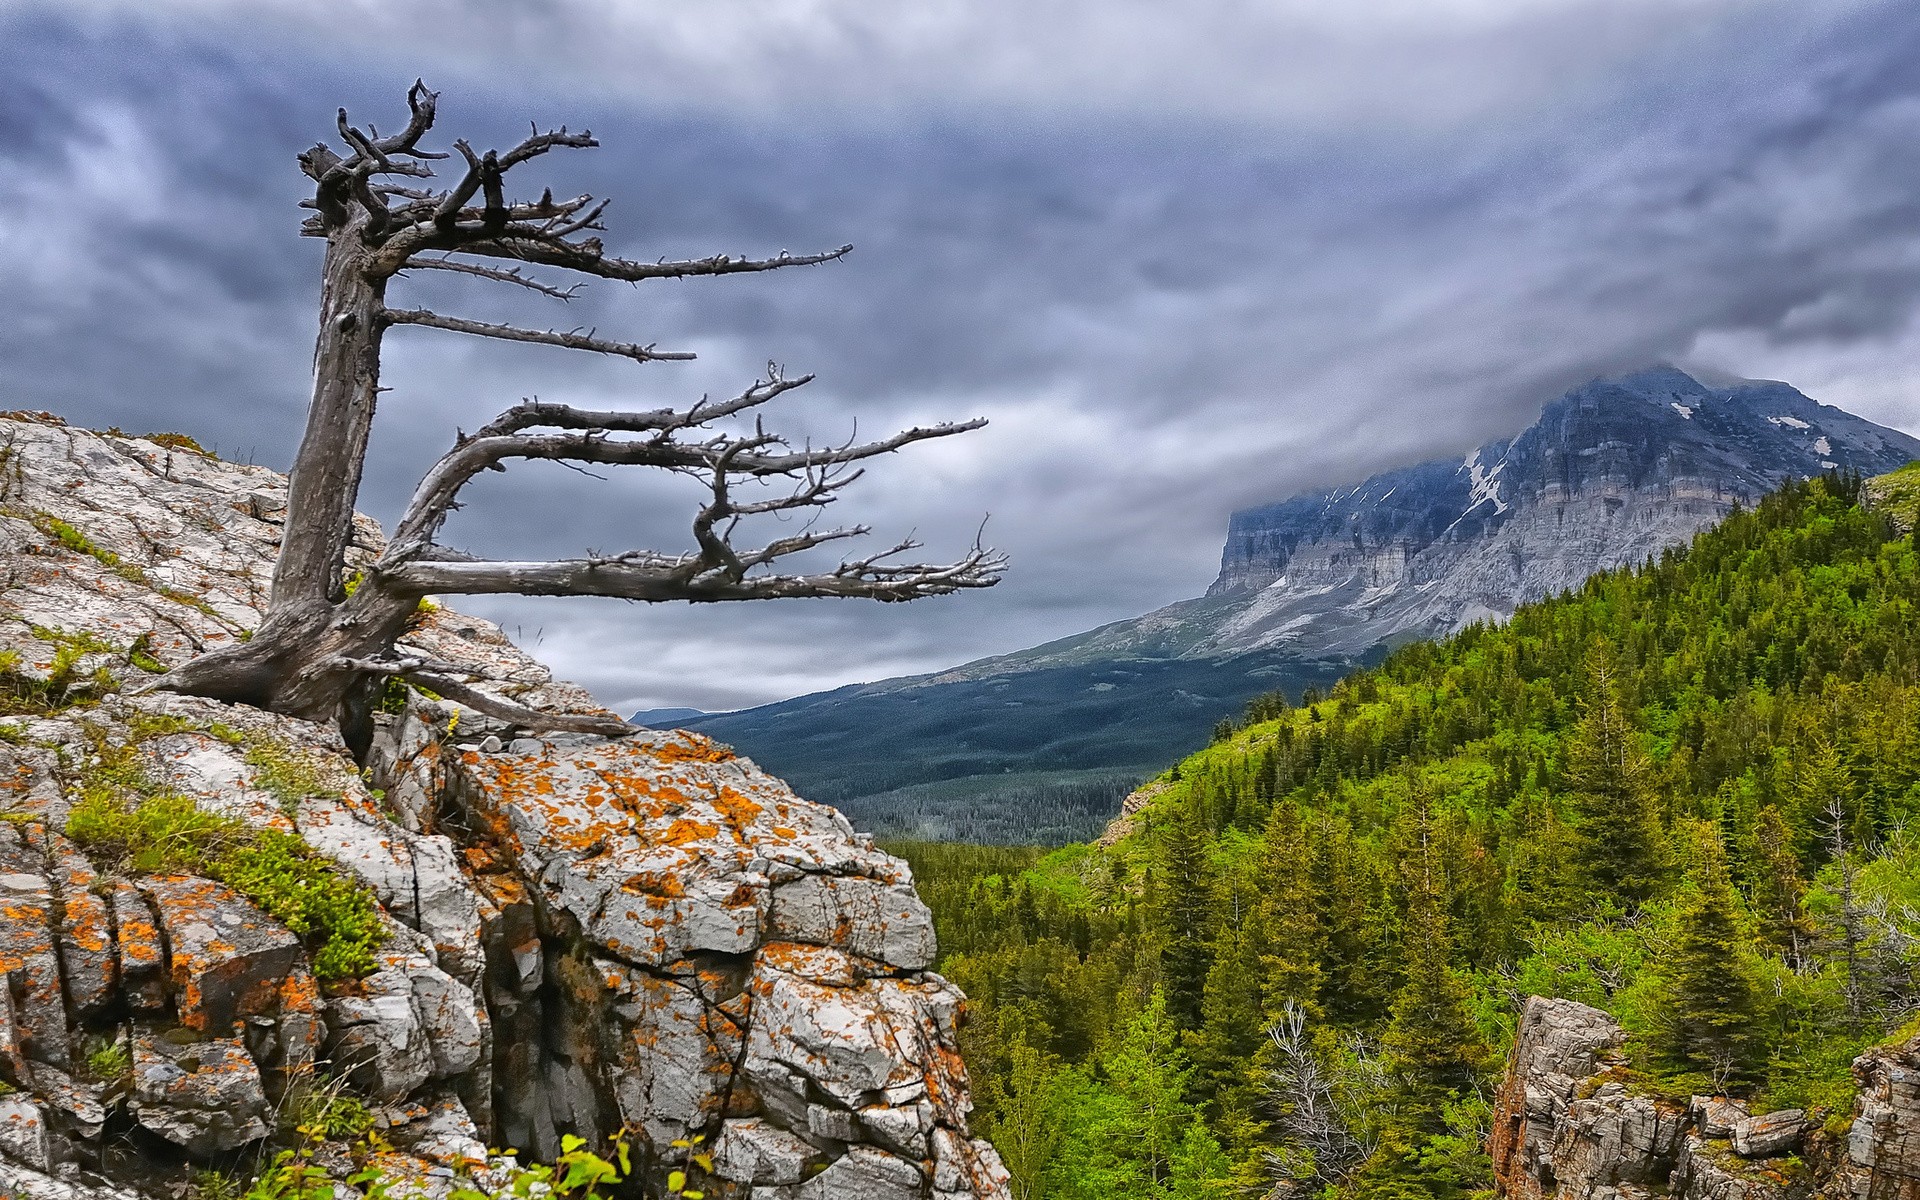 General 1920x1200 landscape Glacier National Park mountains overcast forest dead trees Rocky Mountains Montana USA